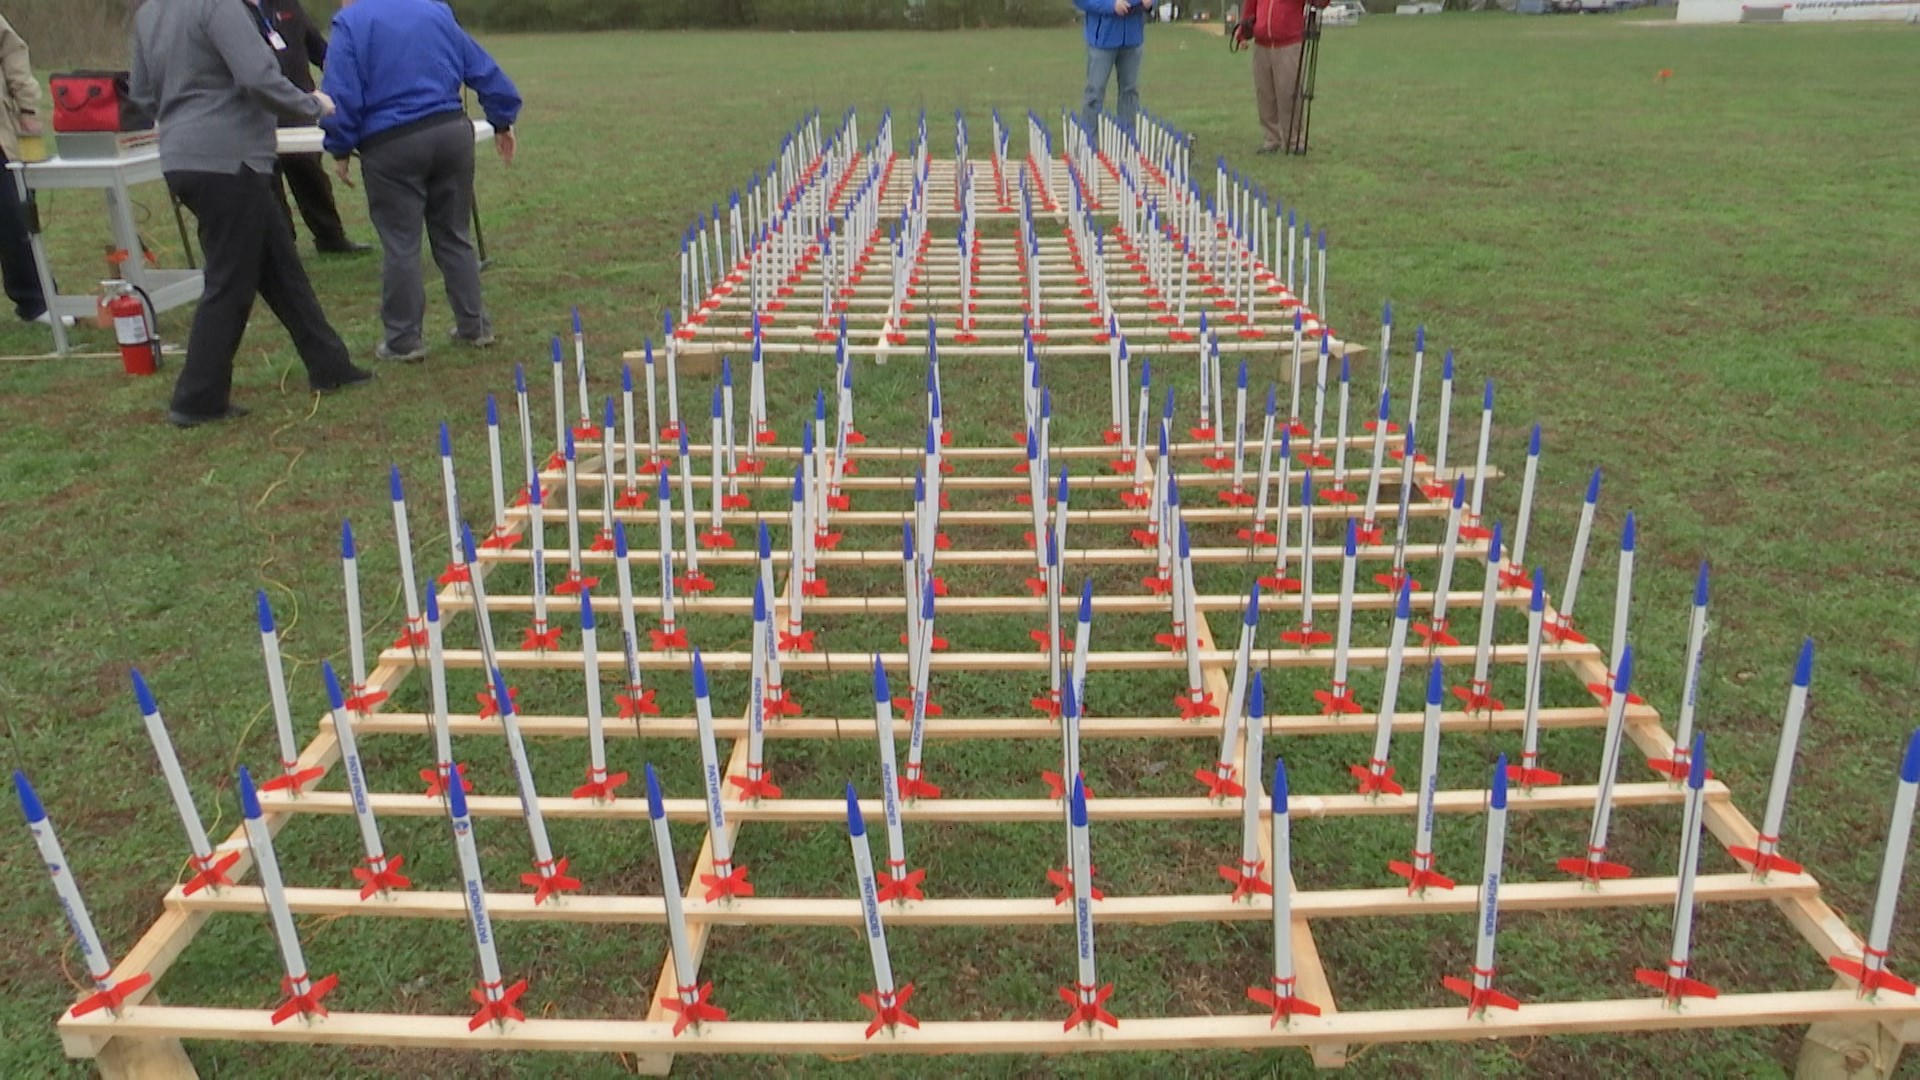 How do you break a Guinness world record? To practice you need 300 model rockets, a couple dozen engineers, and a whole lot of excitement.